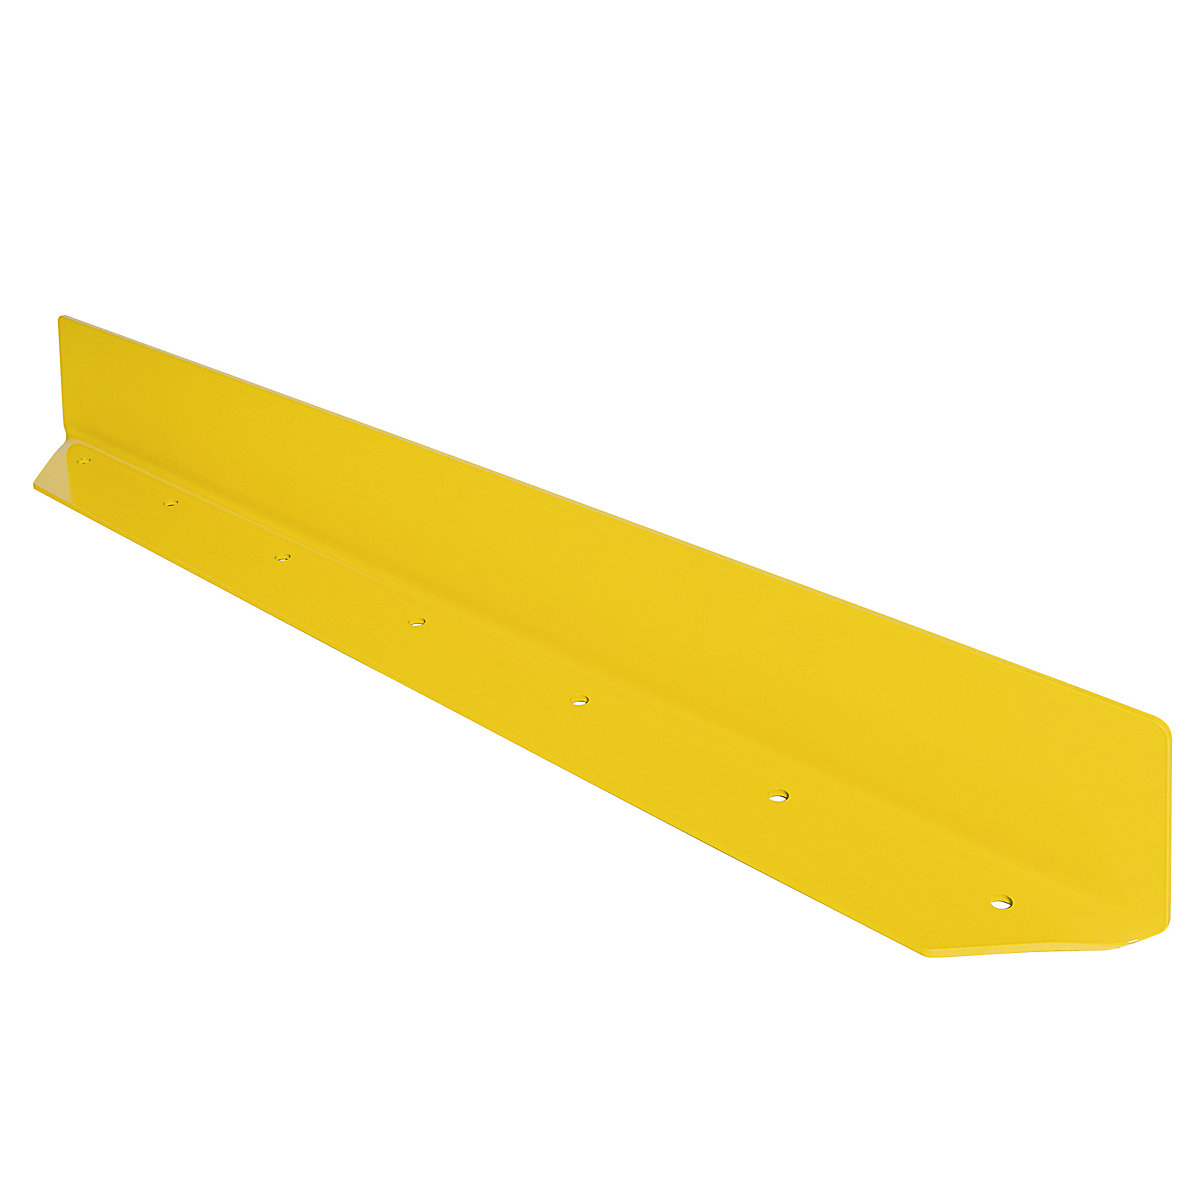 Collision protection guide barrier, length 1200 mm, wall thickness 10 mm-4